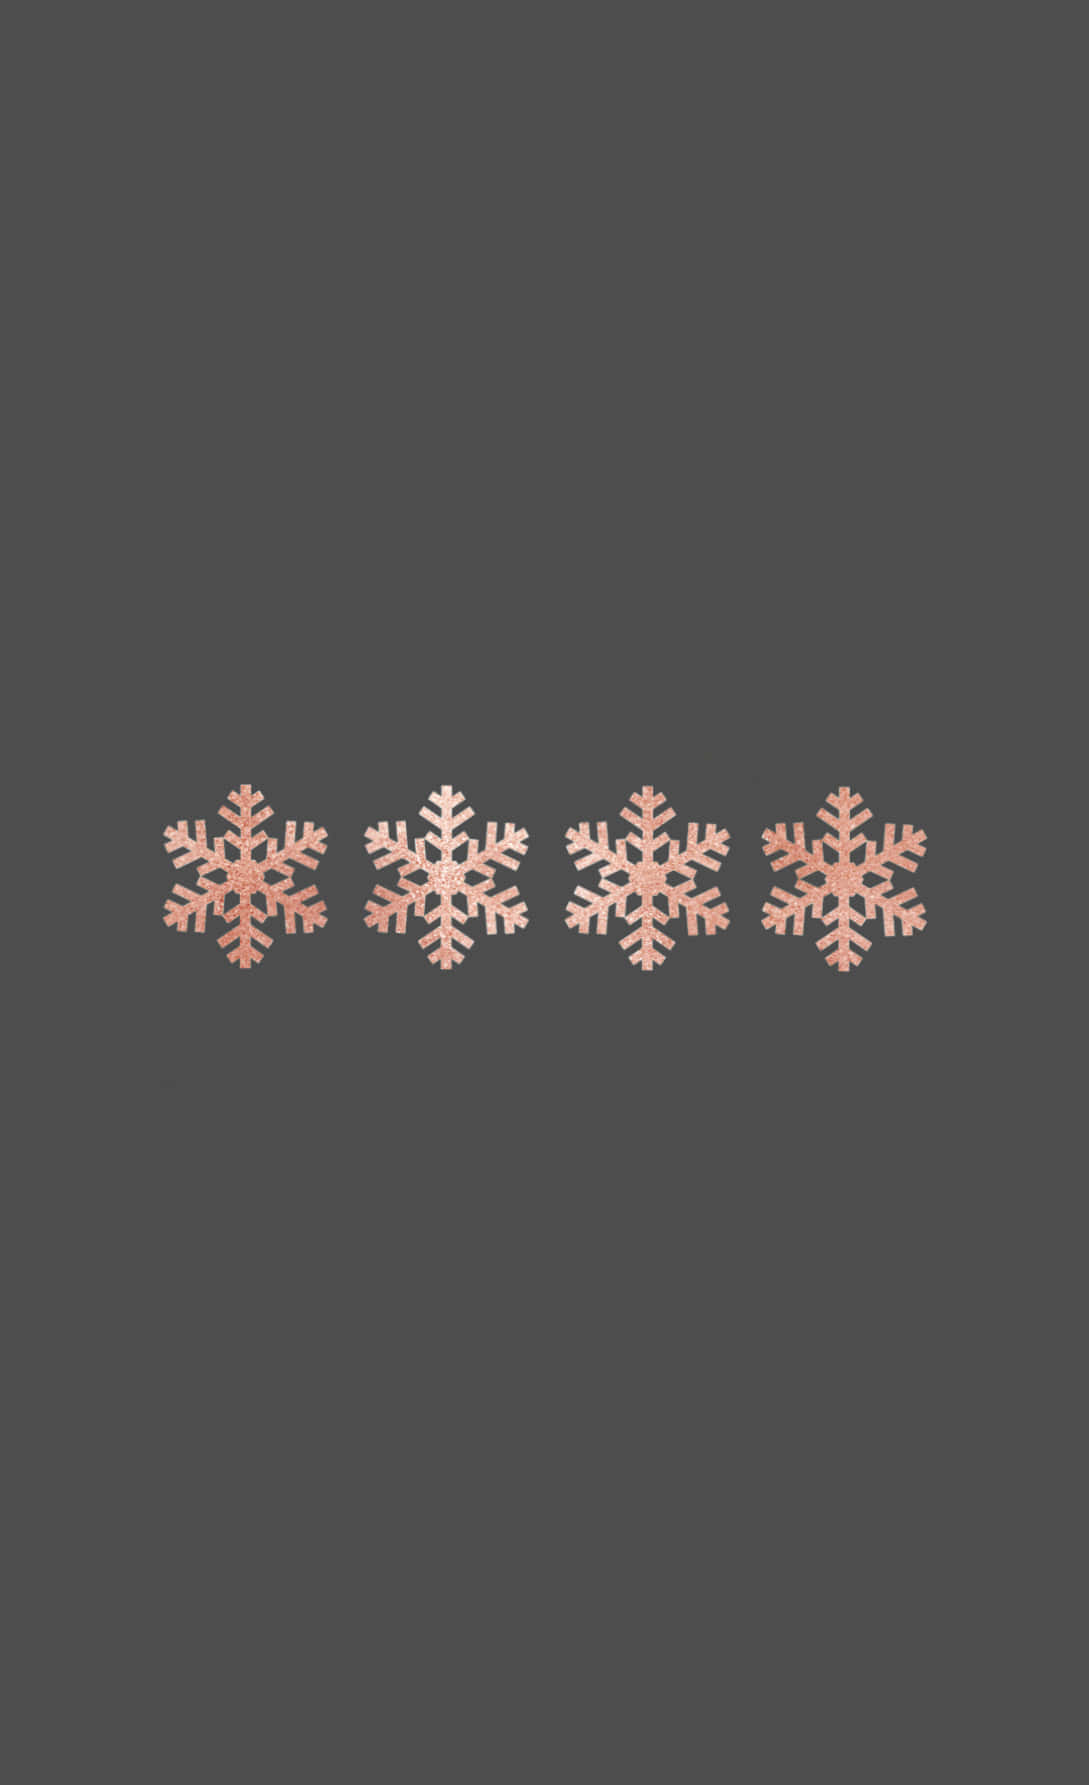 A Set Of Snowflakes On A Gray Background Wallpaper